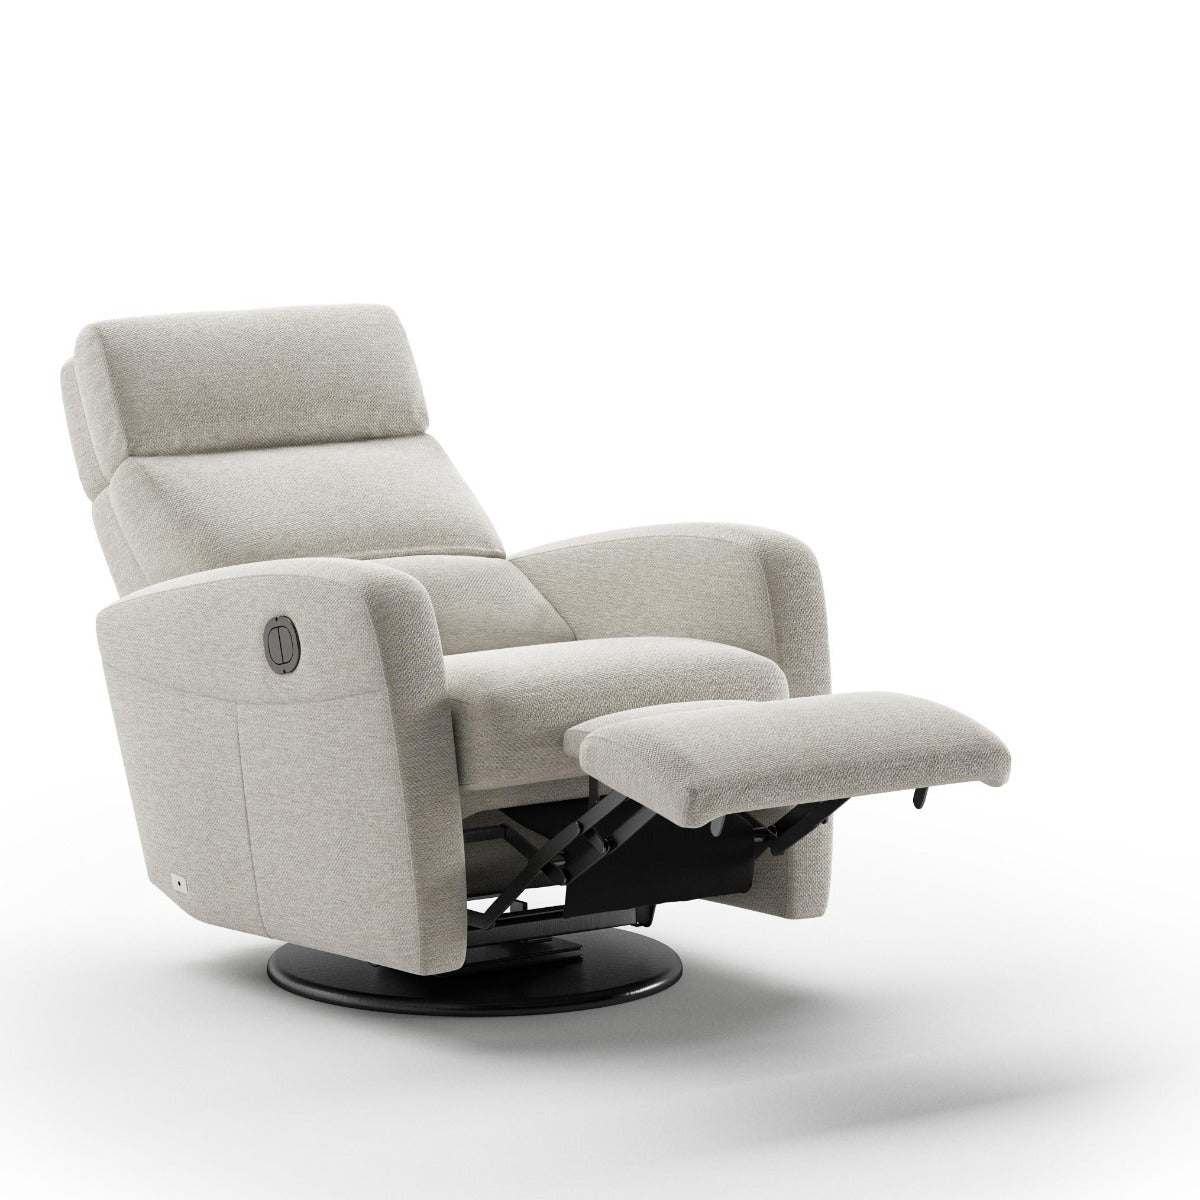 Luonto Furniture Sloped Recliner - Power & Battery - Fun 496